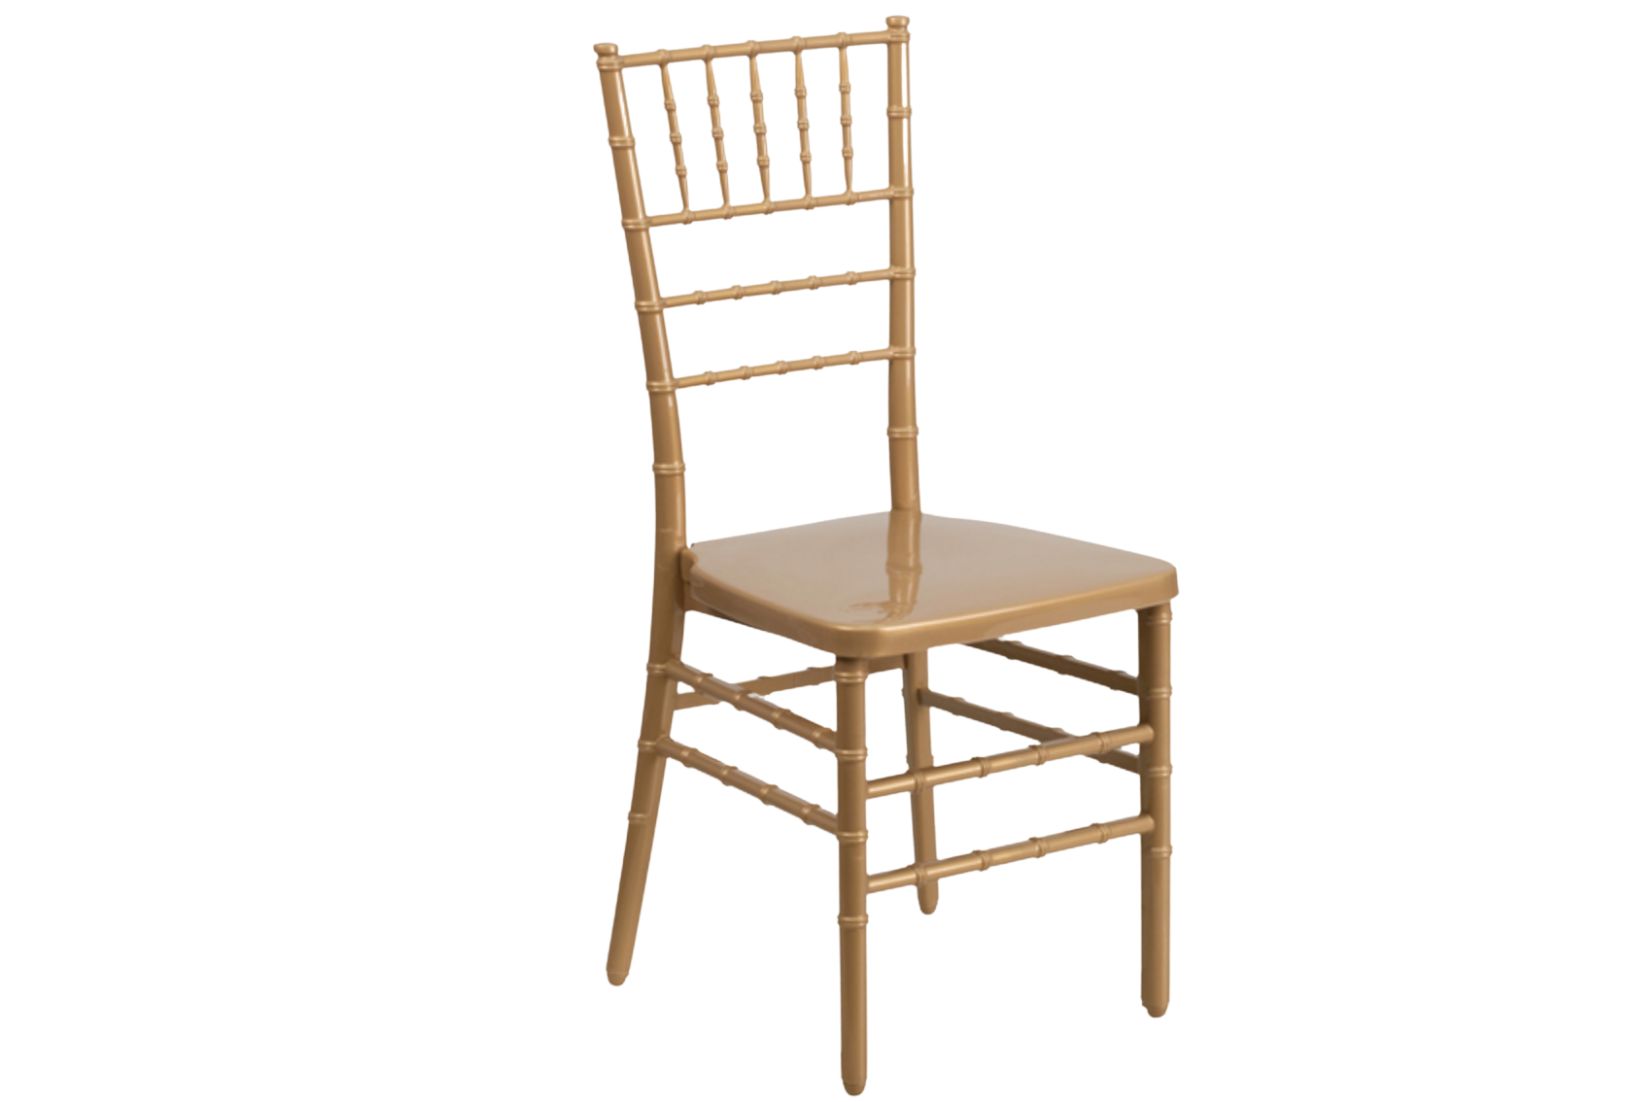 Gold chiavari chair rental available in PG County Maryland